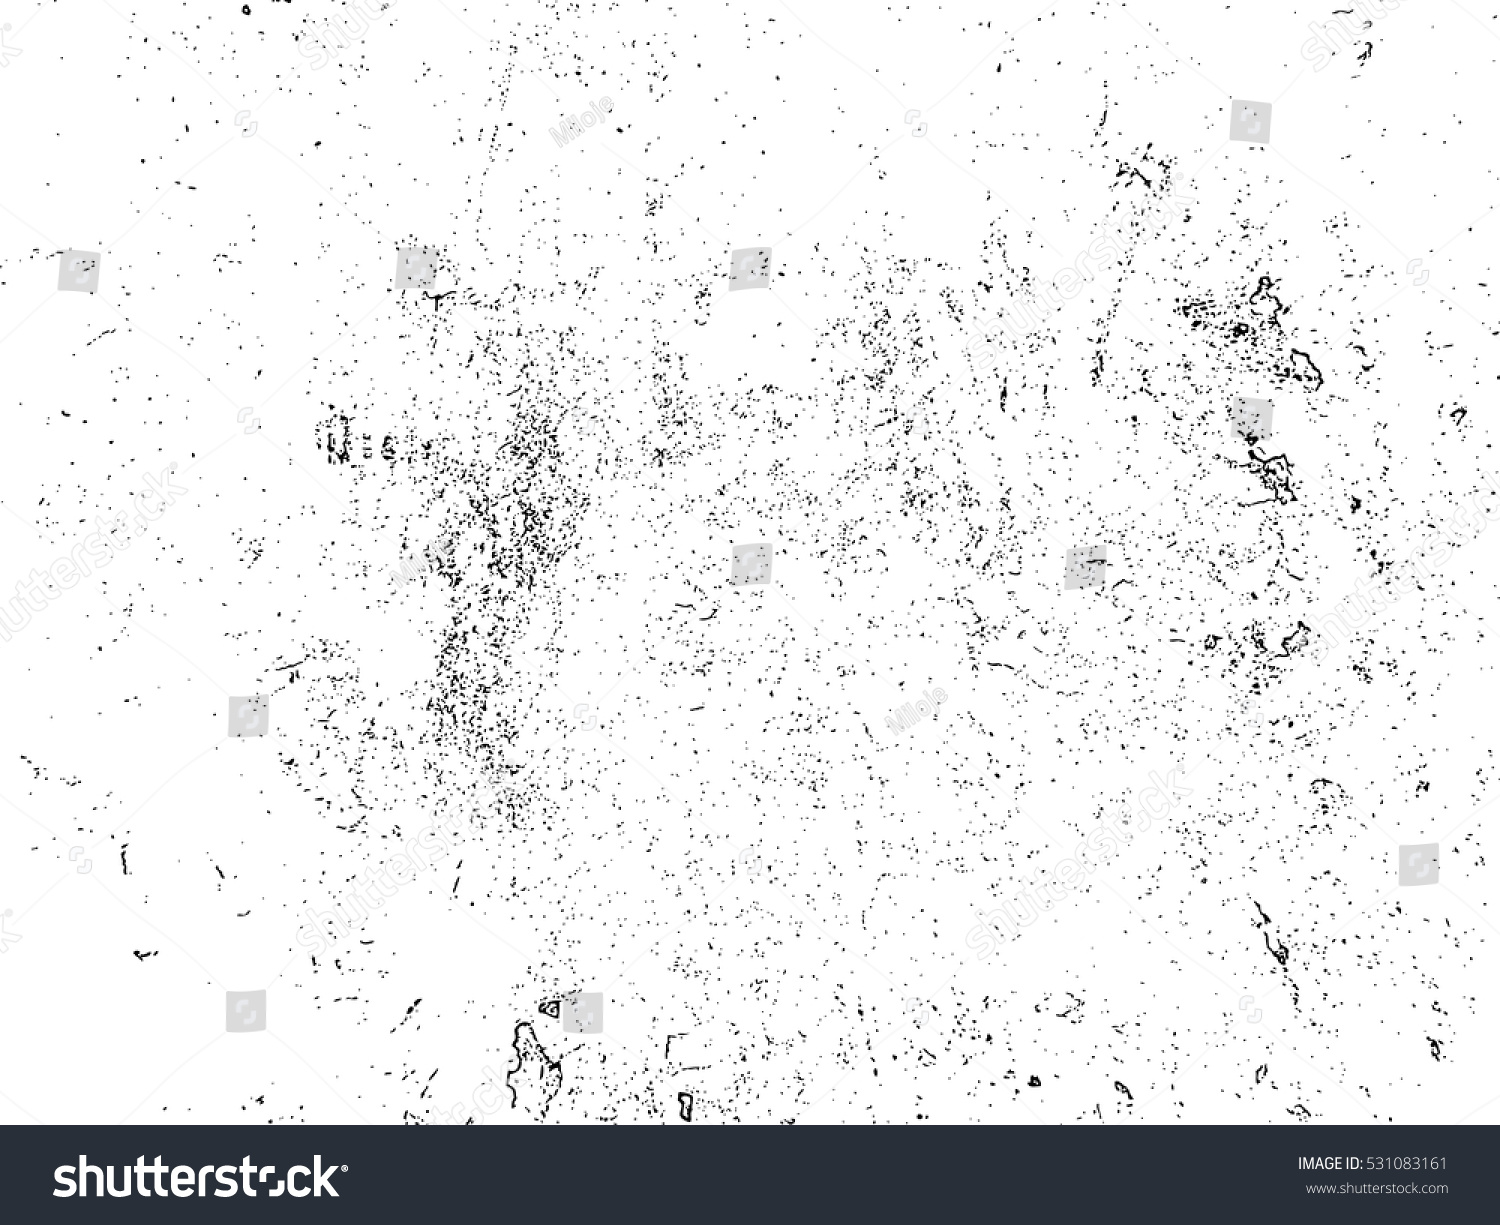 Scratch Grunge Urban Background.Texture Vector.Dust Overlay Distress Grain ,Simply Place illustration over any Object to Create grungy Effect .abstract,splattered , dirty,poster for your design. #531083161